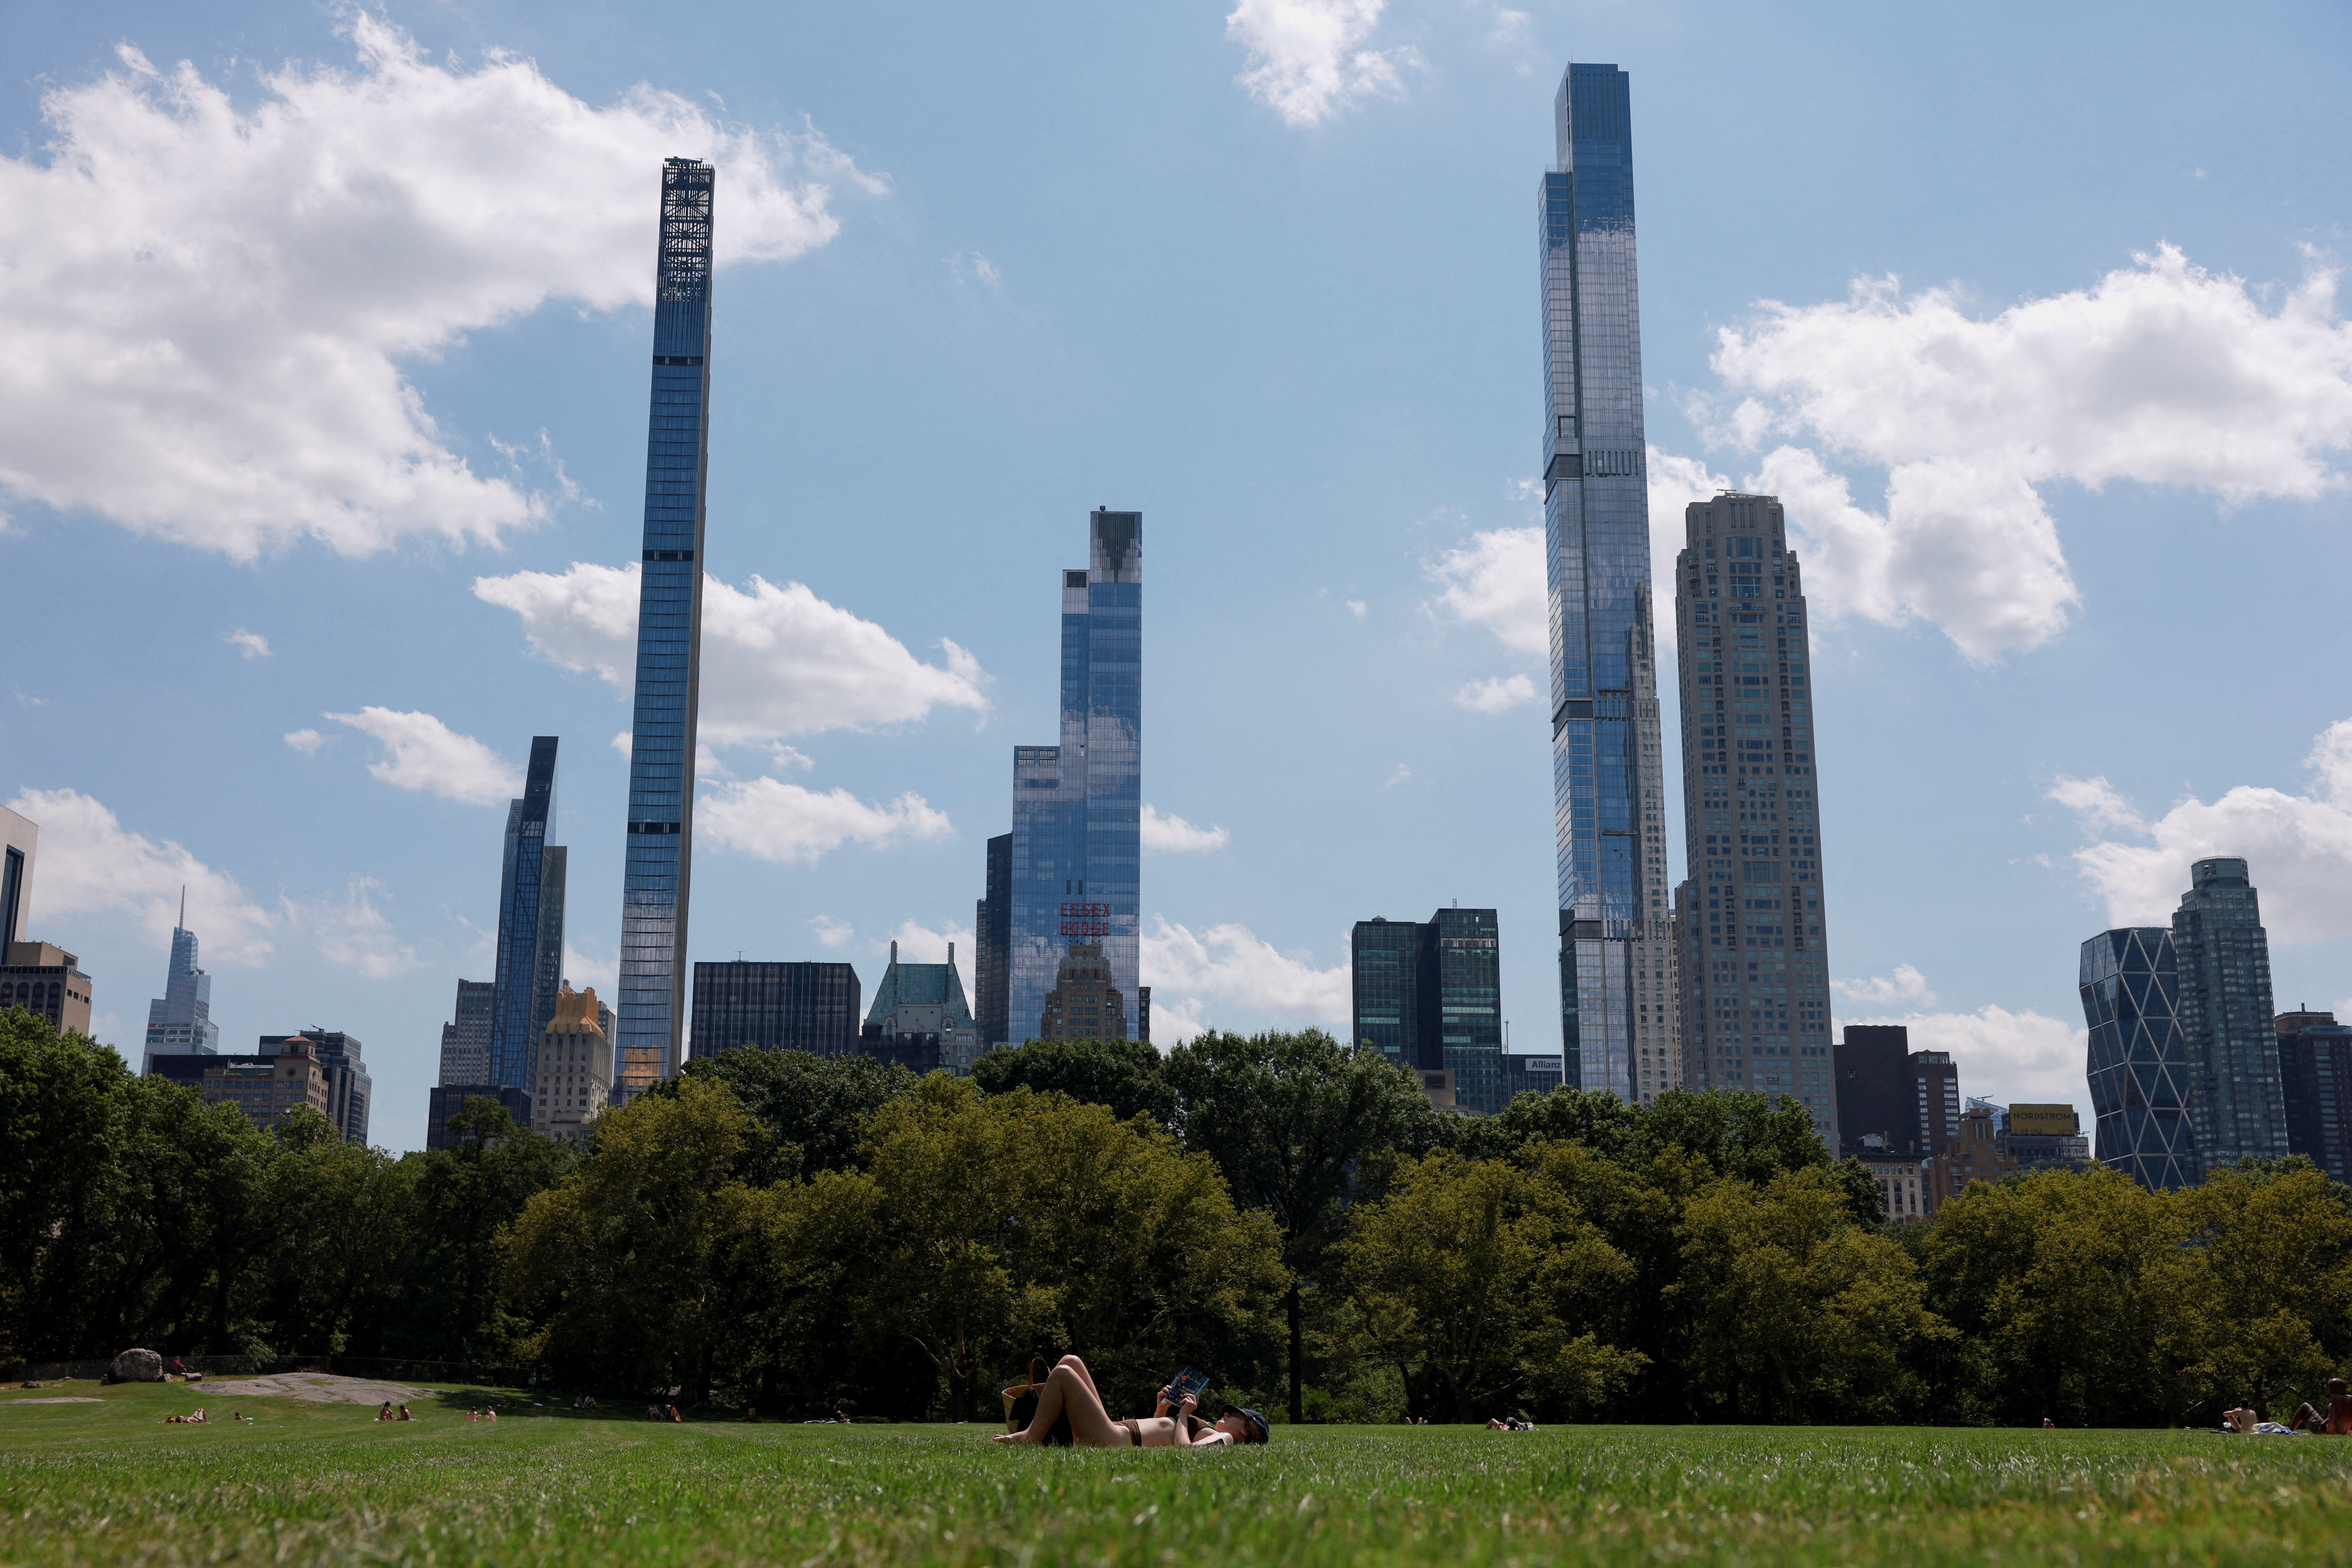 People brave a summer heat wave in New York City